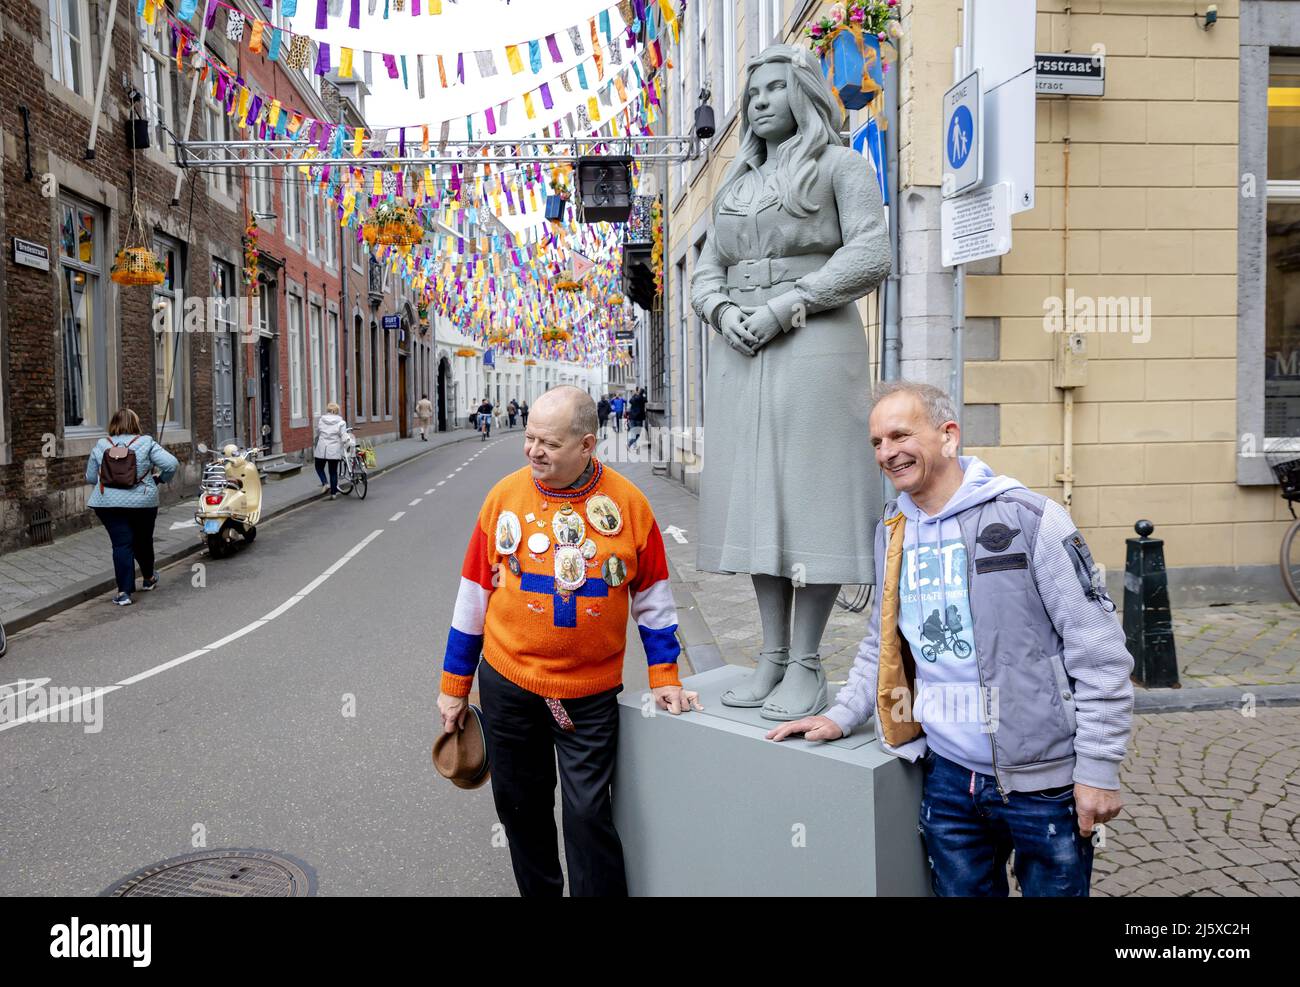 2022-04-26 12:54:52 MAASTRICHT - Royal family fans Oscar Meijer and Johan Vlemmix in the center of Maastricht in the run-up to King's Day. ANP ROBIN VAN LONKHUIJSEN netherlands out - belgium out Stock Photo